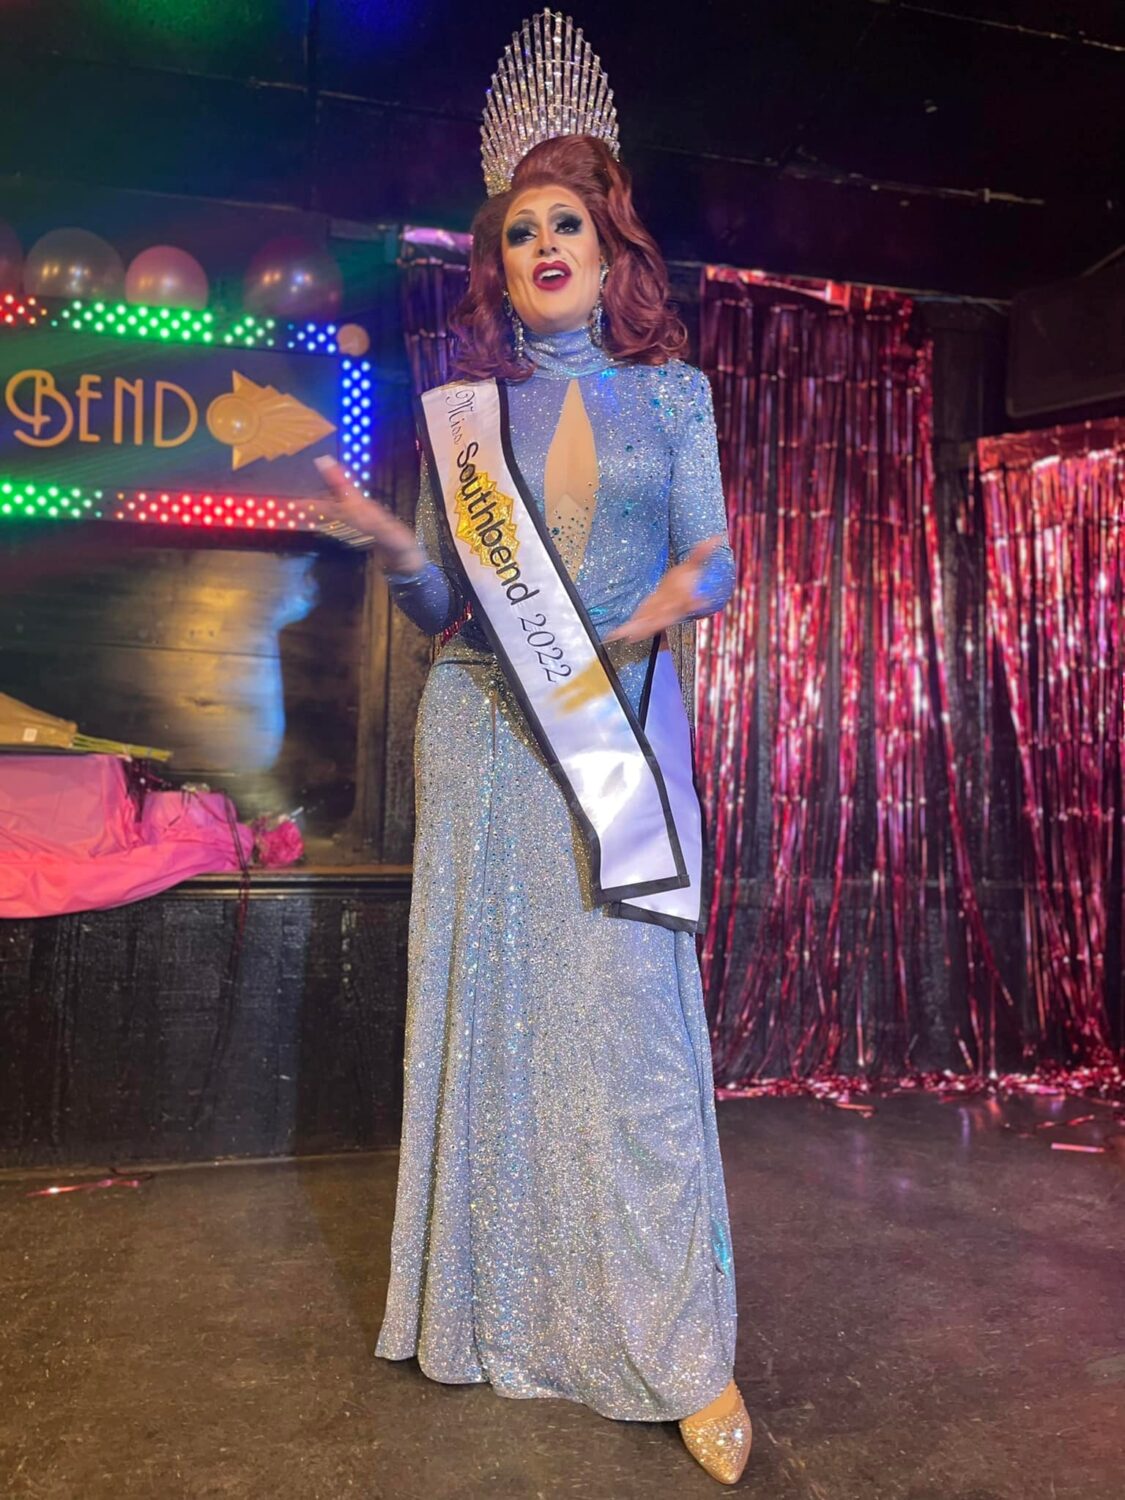 Anaslaysia Annejob after being crowned Miss Southbend 2022 | Miss Southbend | Southbend Tavern (Columbus, Ohio) | 1/30/2022